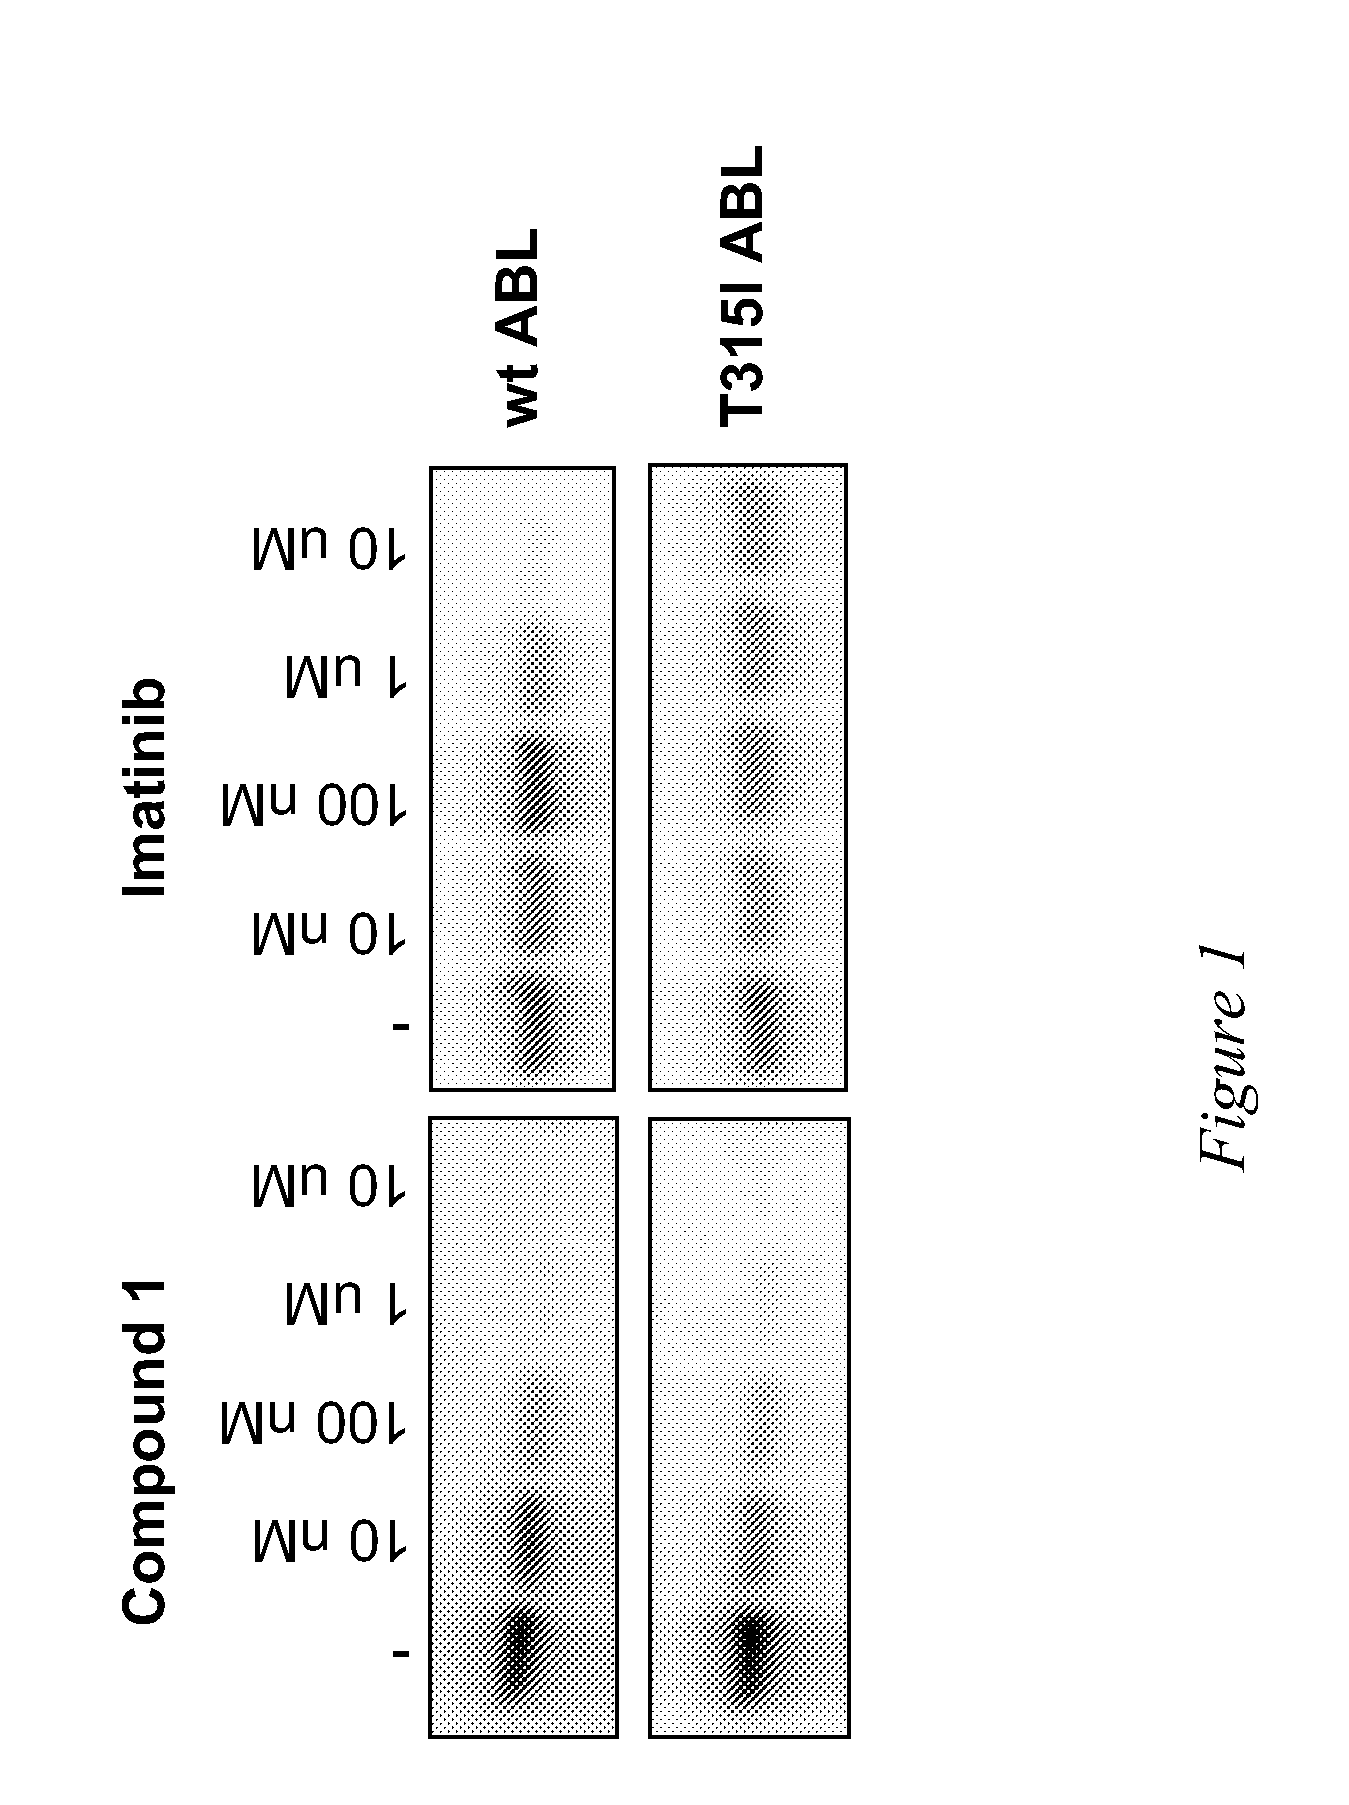 Use of a Kinase Inhibitor for the Treatment of Particular Resistant Tumors